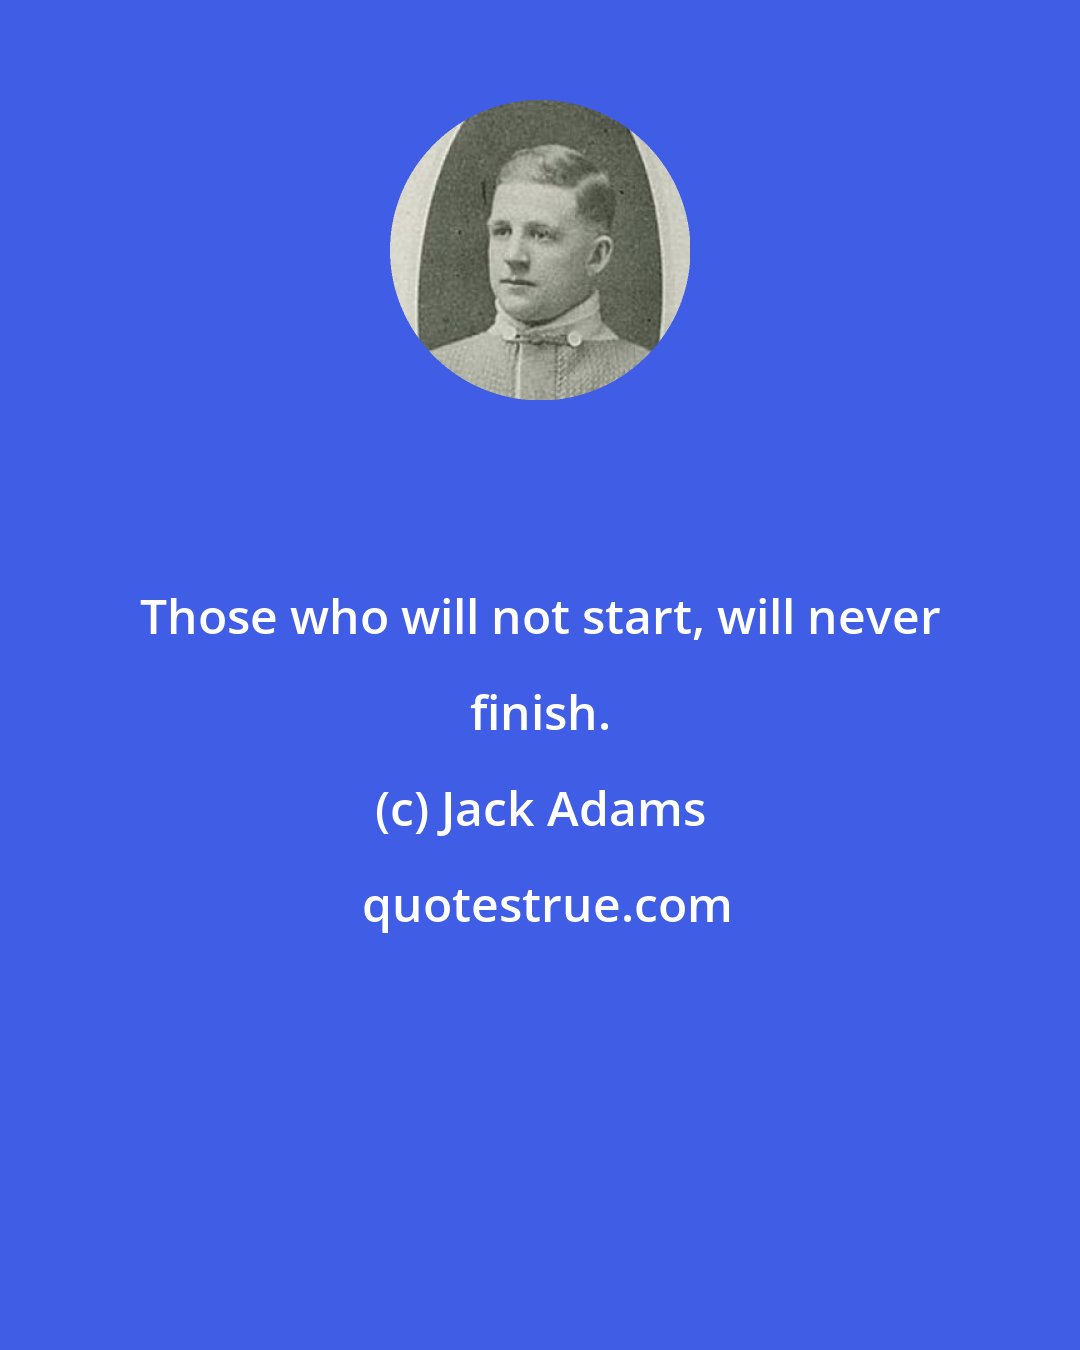 Jack Adams: Those who will not start, will never finish.